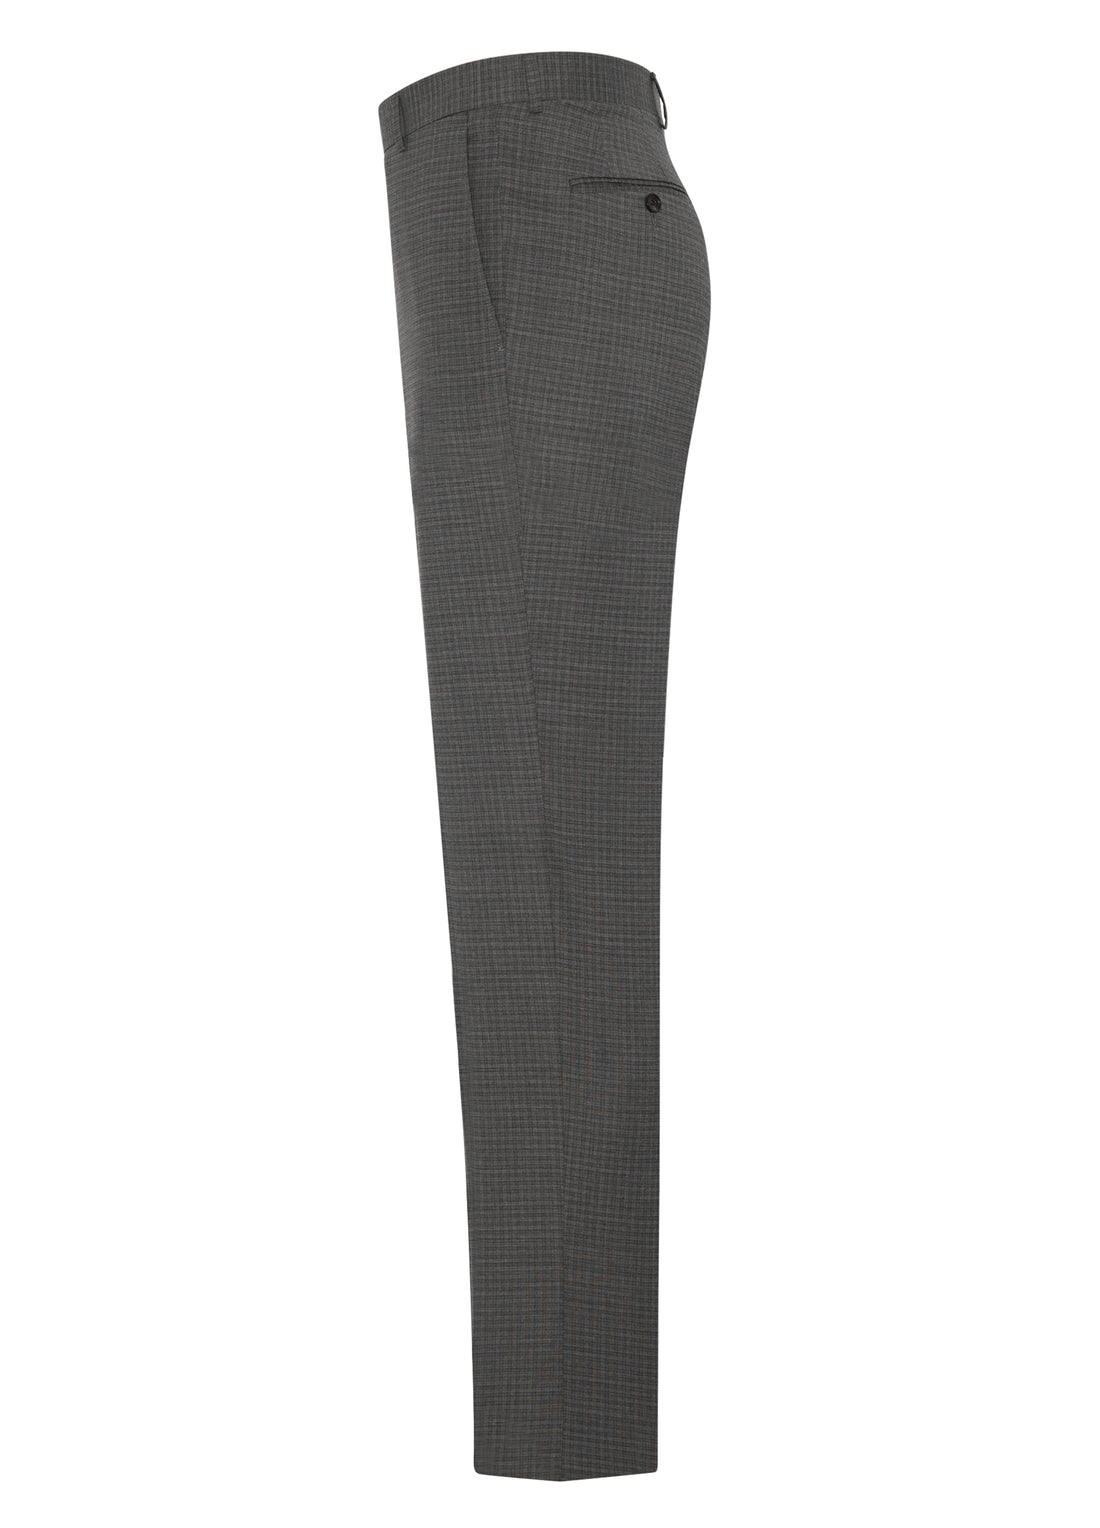 Grey Tropical Wool Minicheck Flat Front Trousers